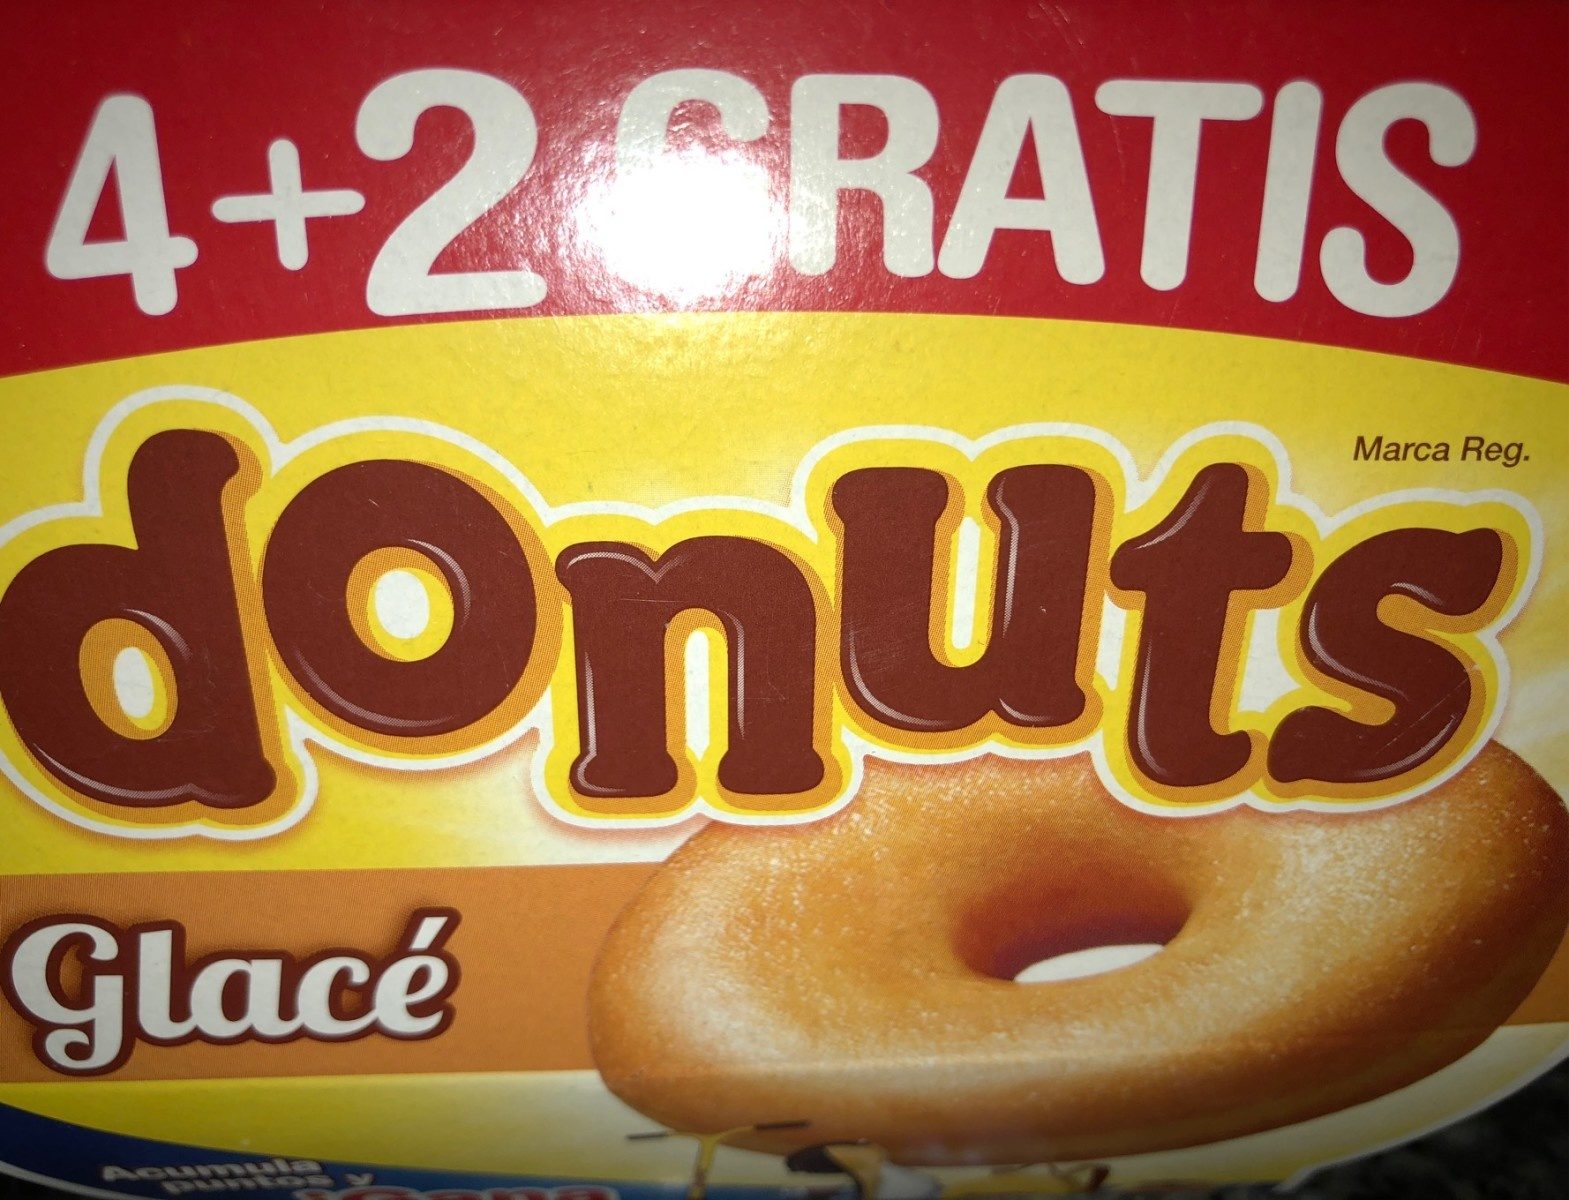 Donuts Panrico Glace Pack 312 G